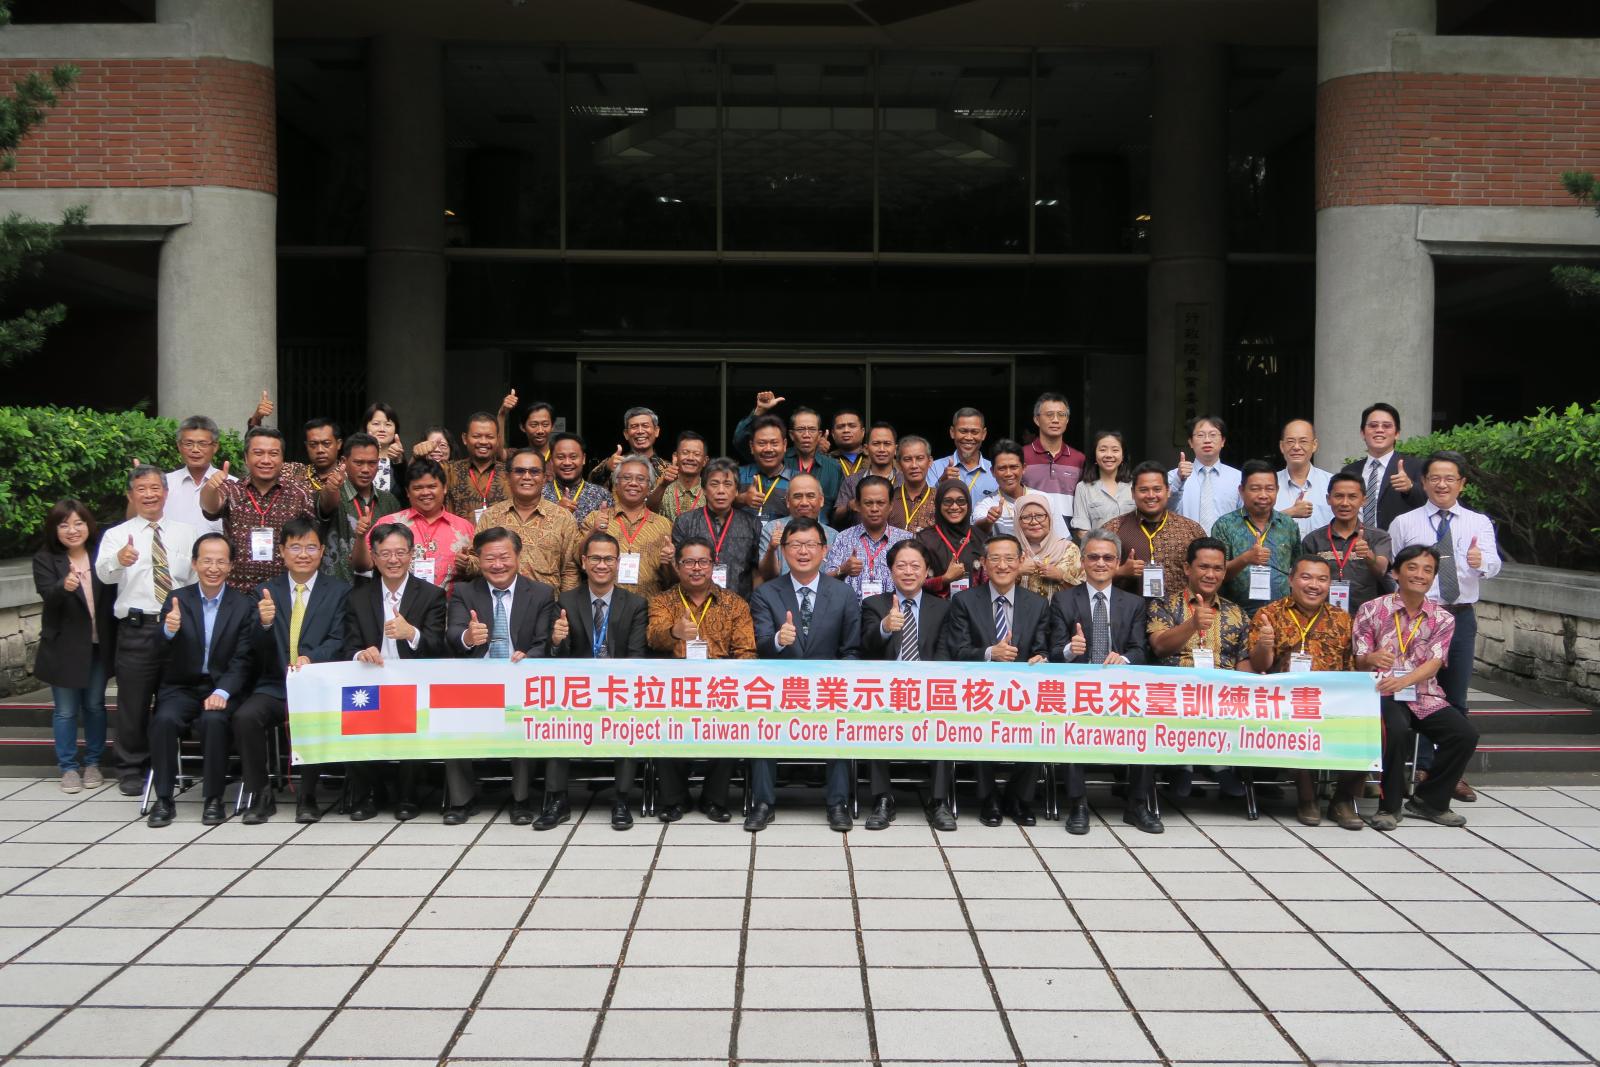 A group photo of COA Deputy Minister Lee Tuey-chih and core farmers from the Karawang area of Indonesia who came to Taiwan for training.